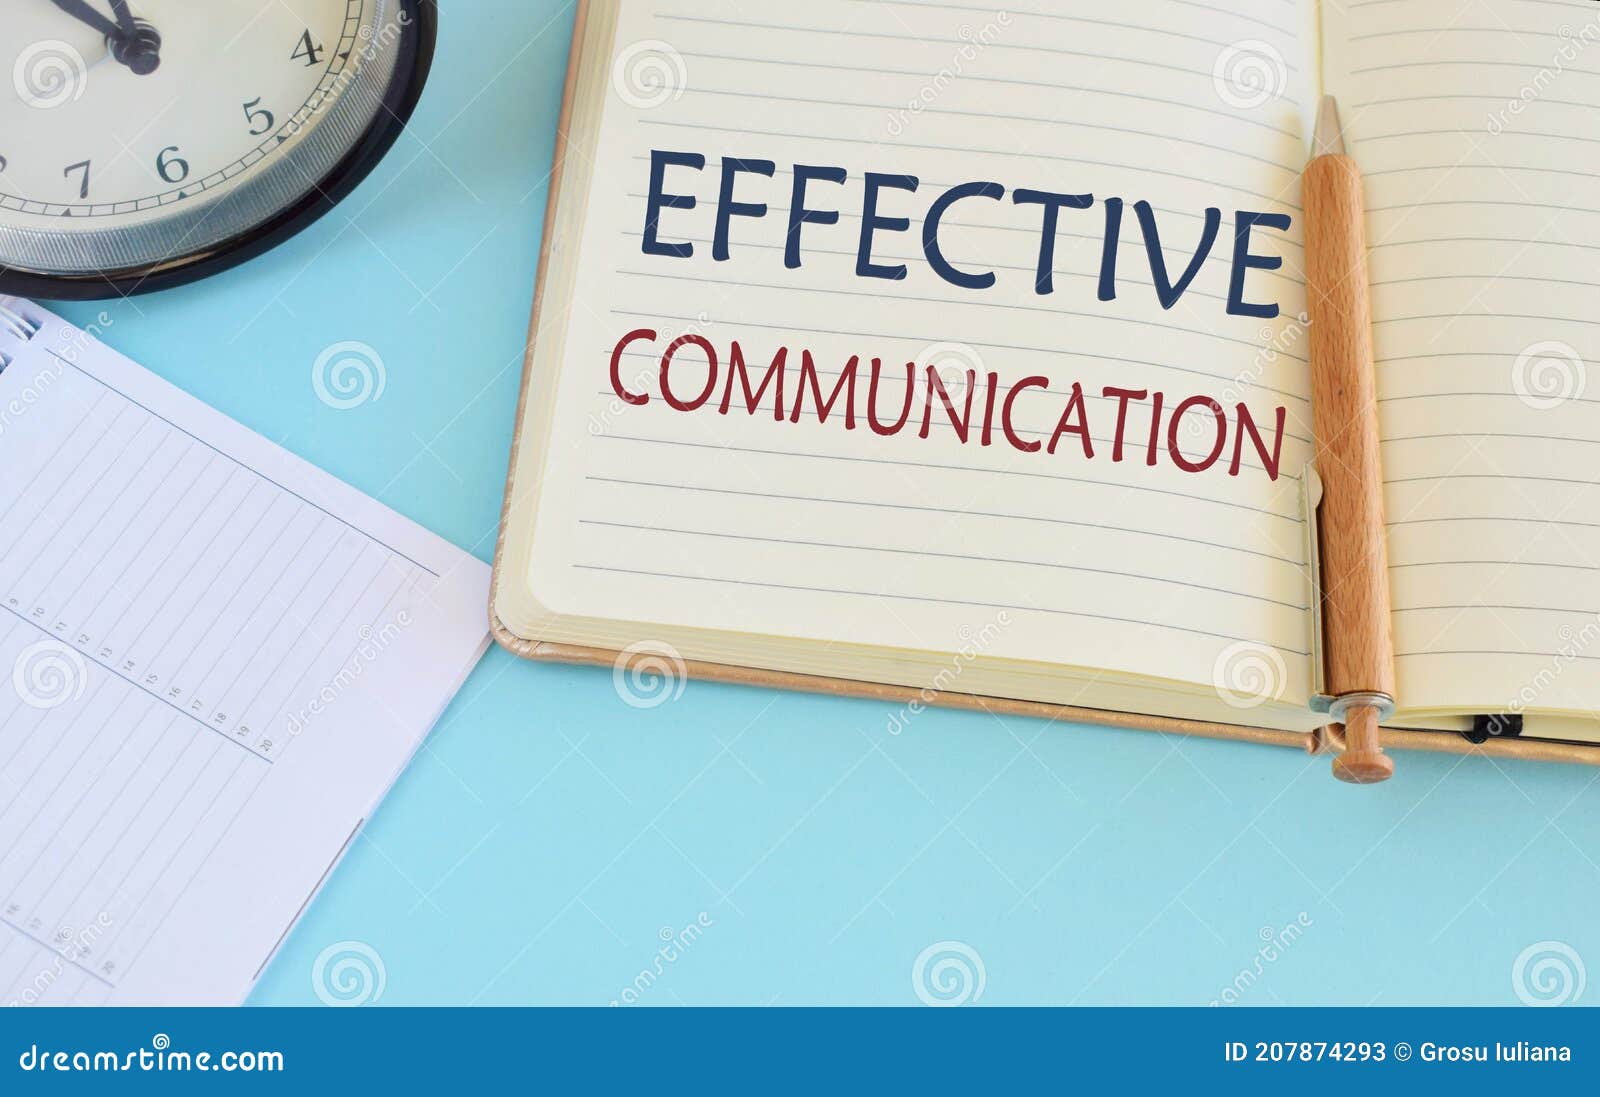 effective communication text written in notebook. concept eaning the ability to convey information to another effectively and